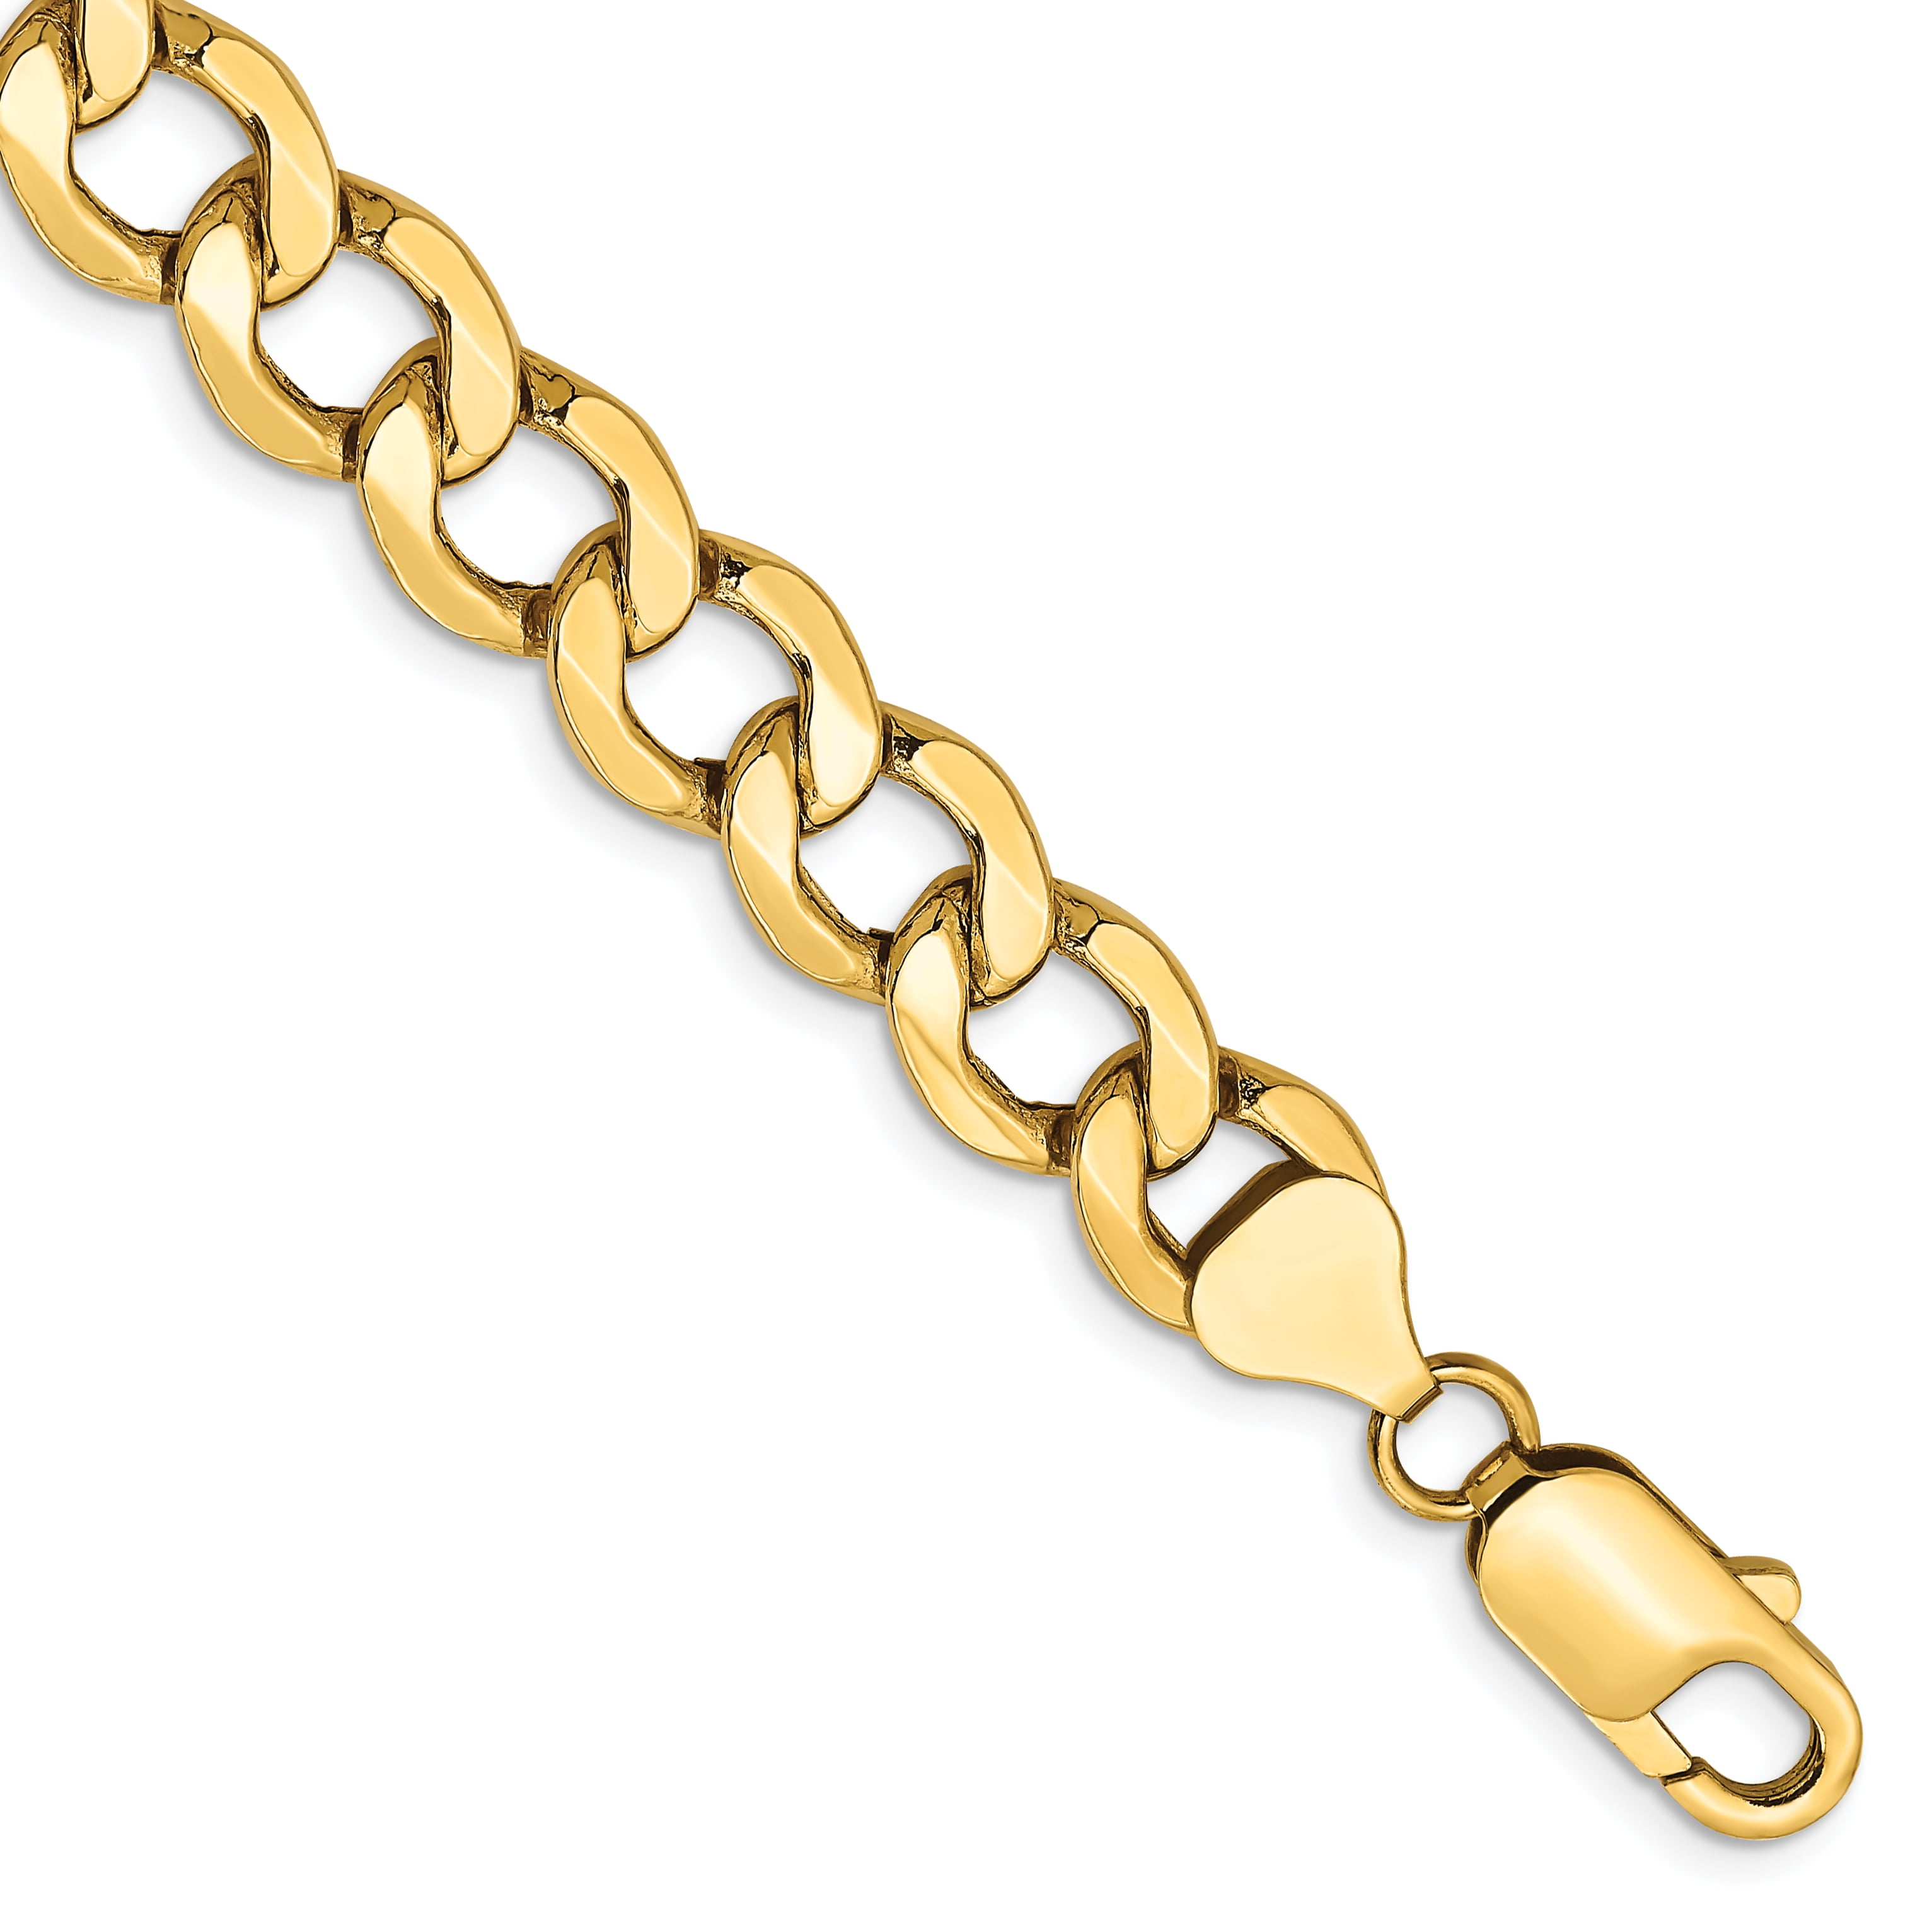 8 Length 10K 3.35mm Semi-Solid Curb Link Chain 